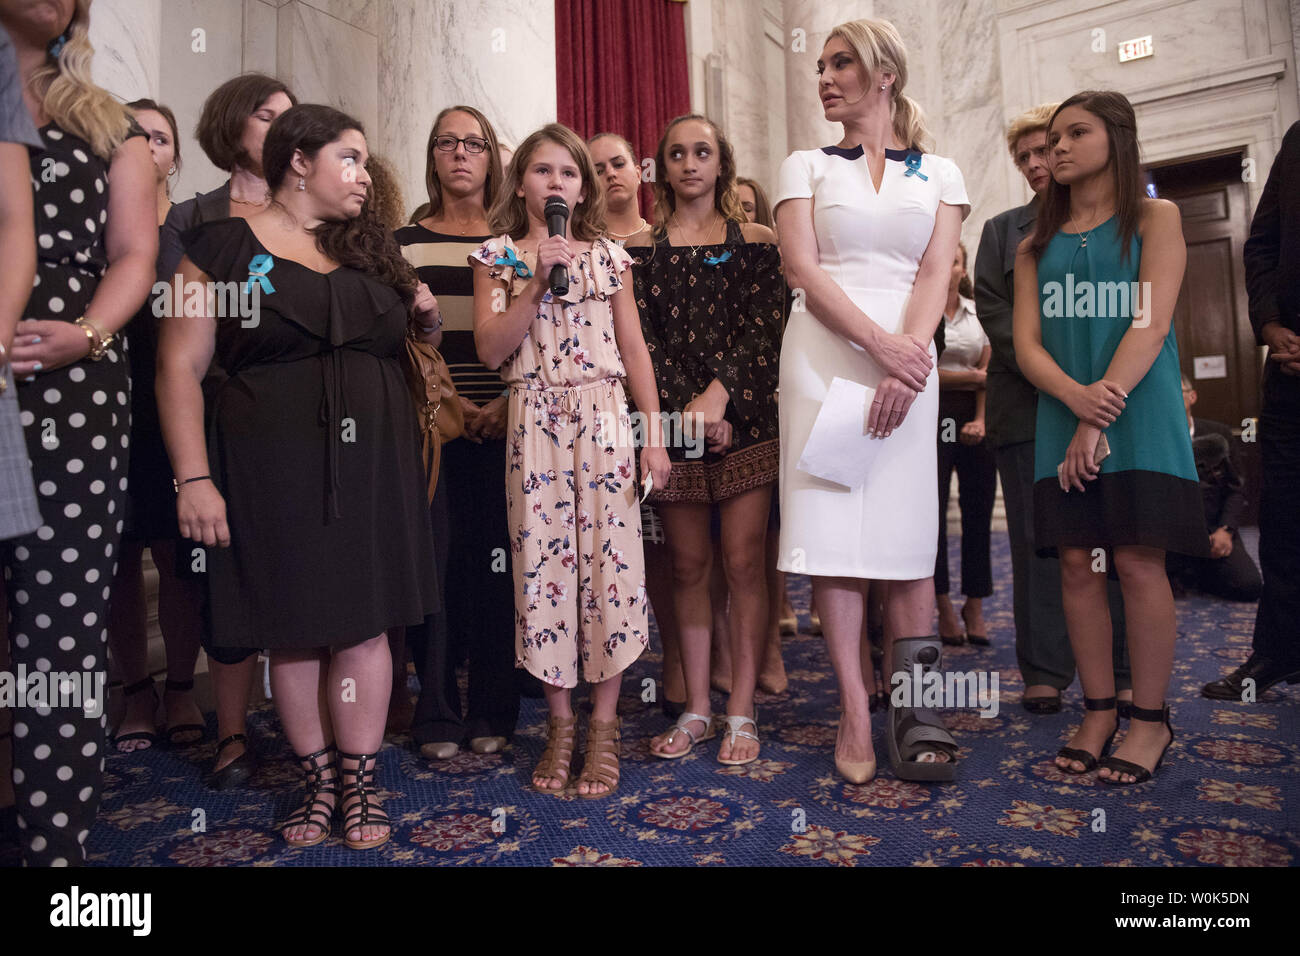 Amy Wagner, 11, gives her name as she stands with fellow victims of convicted child molester and former Team USA Olympic doctor Larry Nassar give their names during a press conference on abuse within gymnastics and youth sports and the necessary reforms needed to keep young athletes safe, on Capitol Hill in Washington, D.C. on July 24, 2018. Photo by Kevin Dietsch/UPI Stock Photo